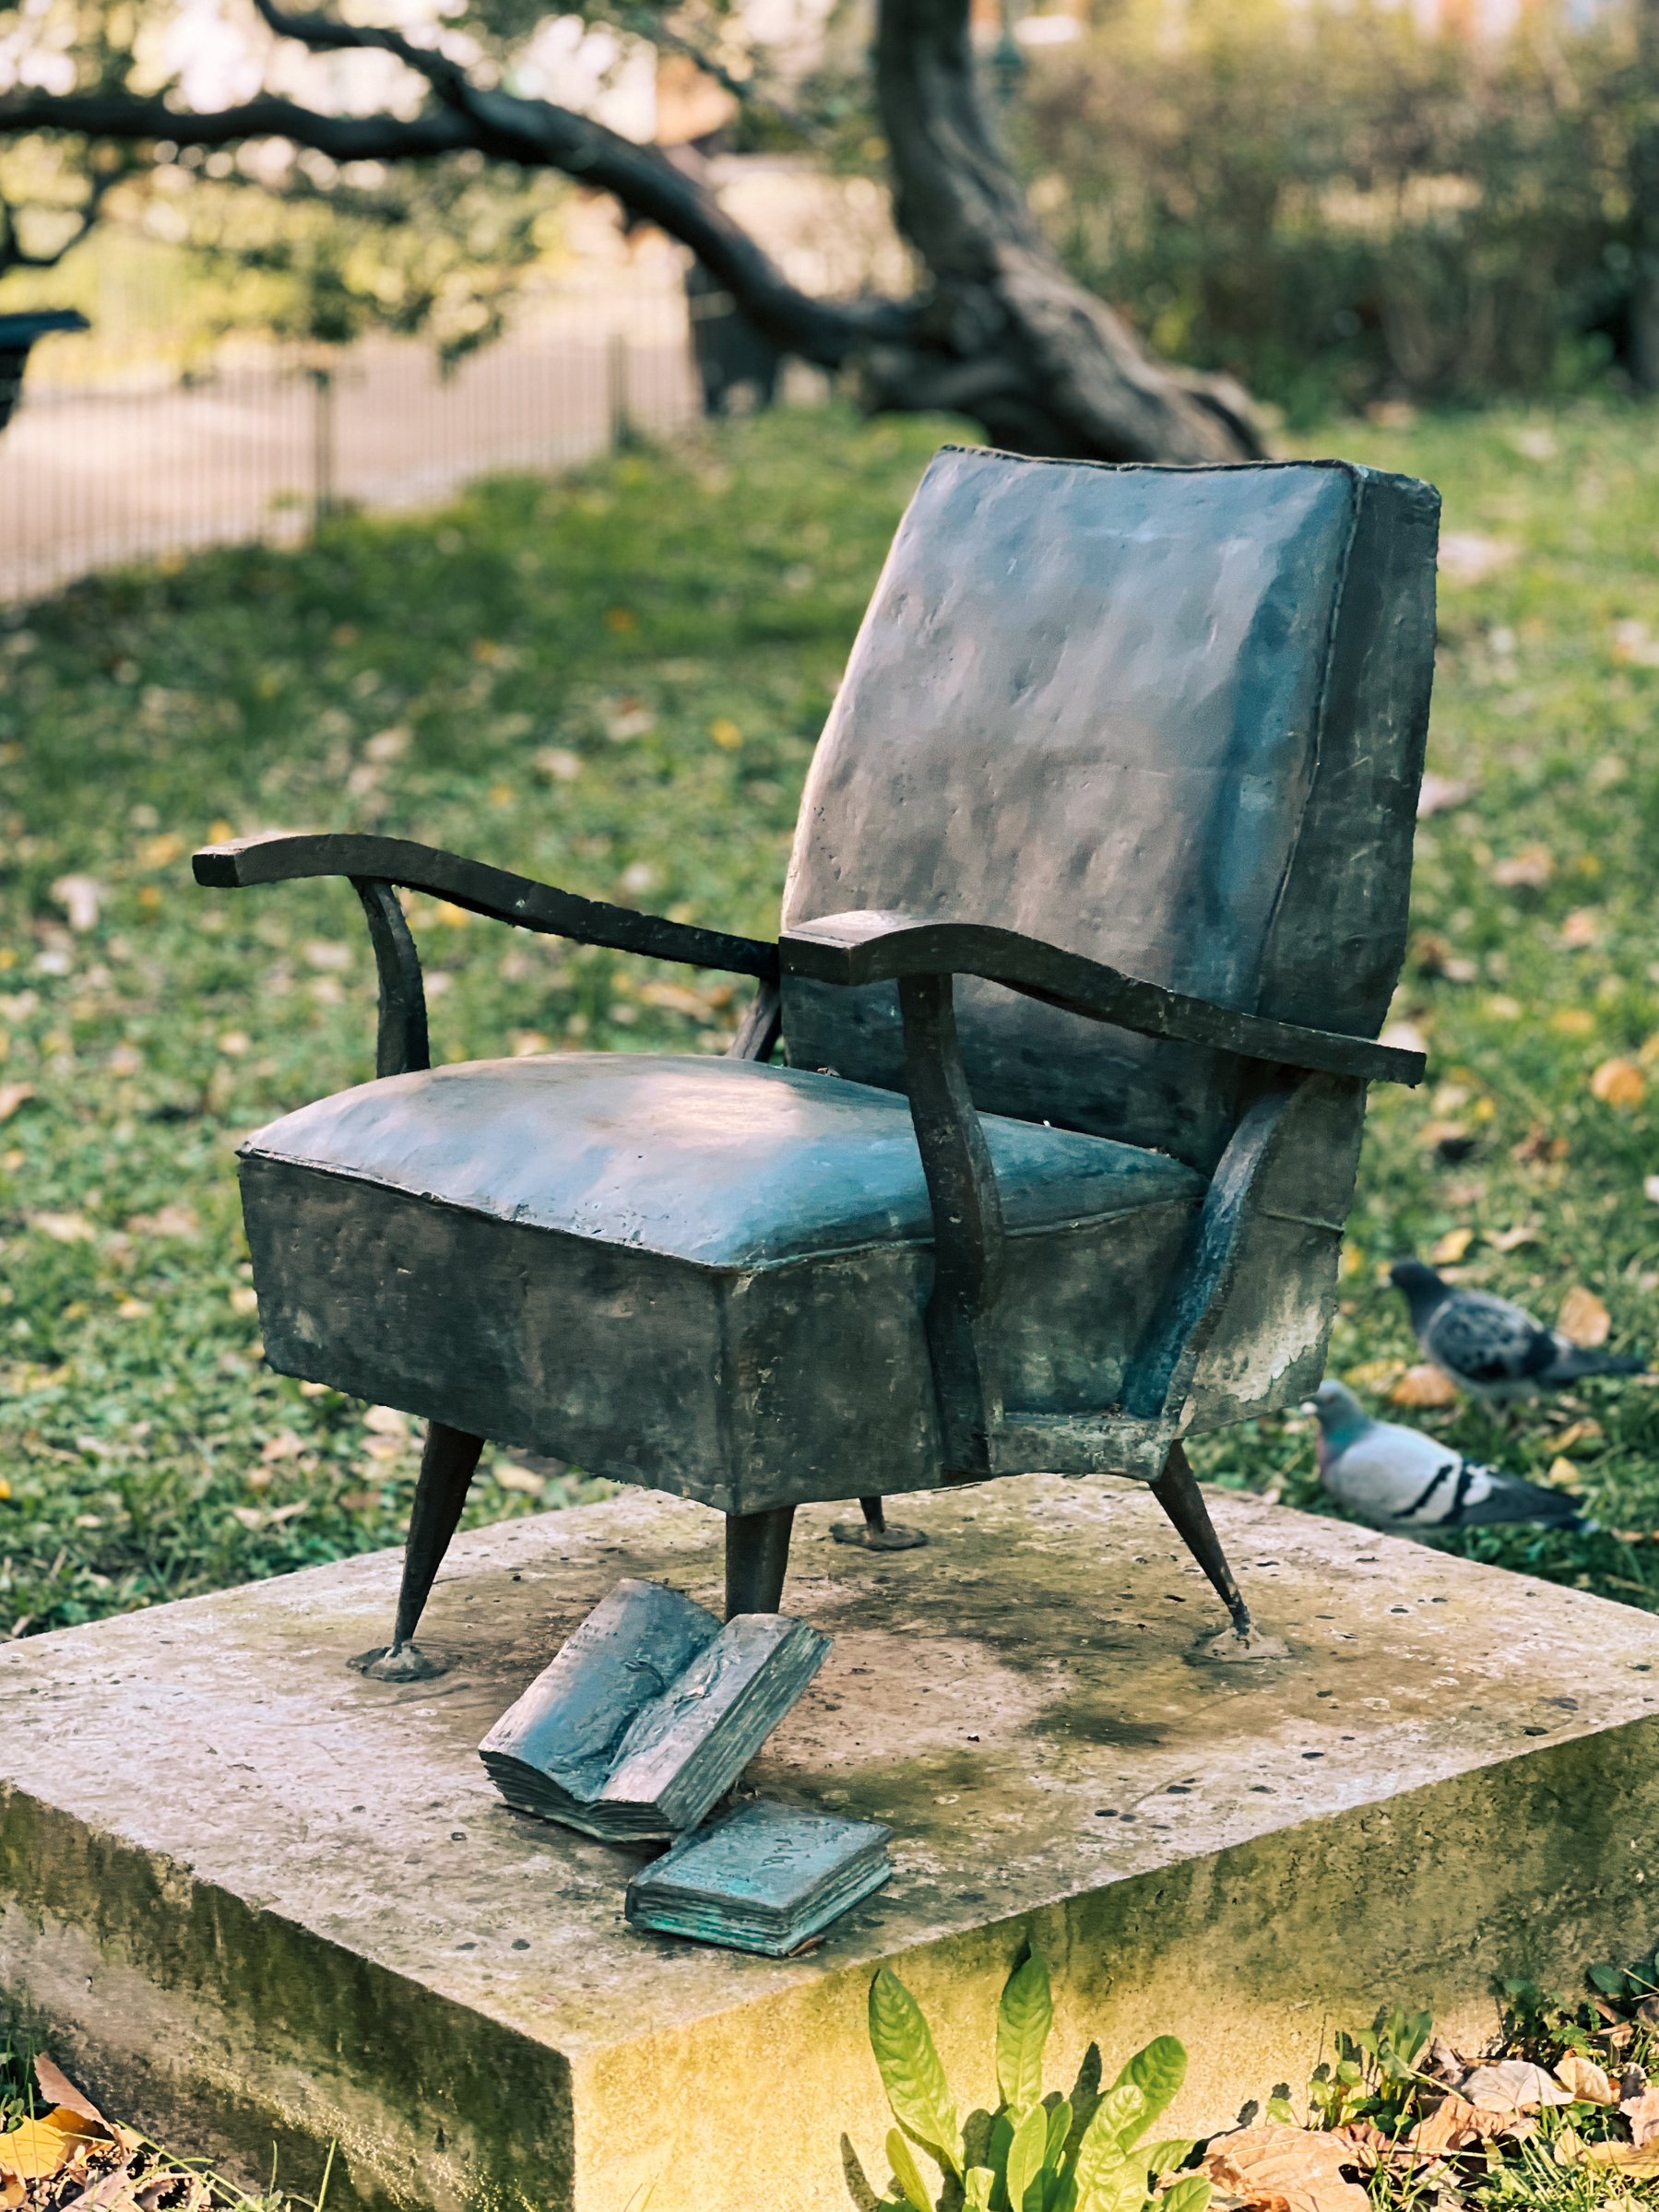 A bronze sculpture of an armchair and books on a stone pedestal, set in a park with green grass and trees in the background. There are pigeons on the ground nearby.